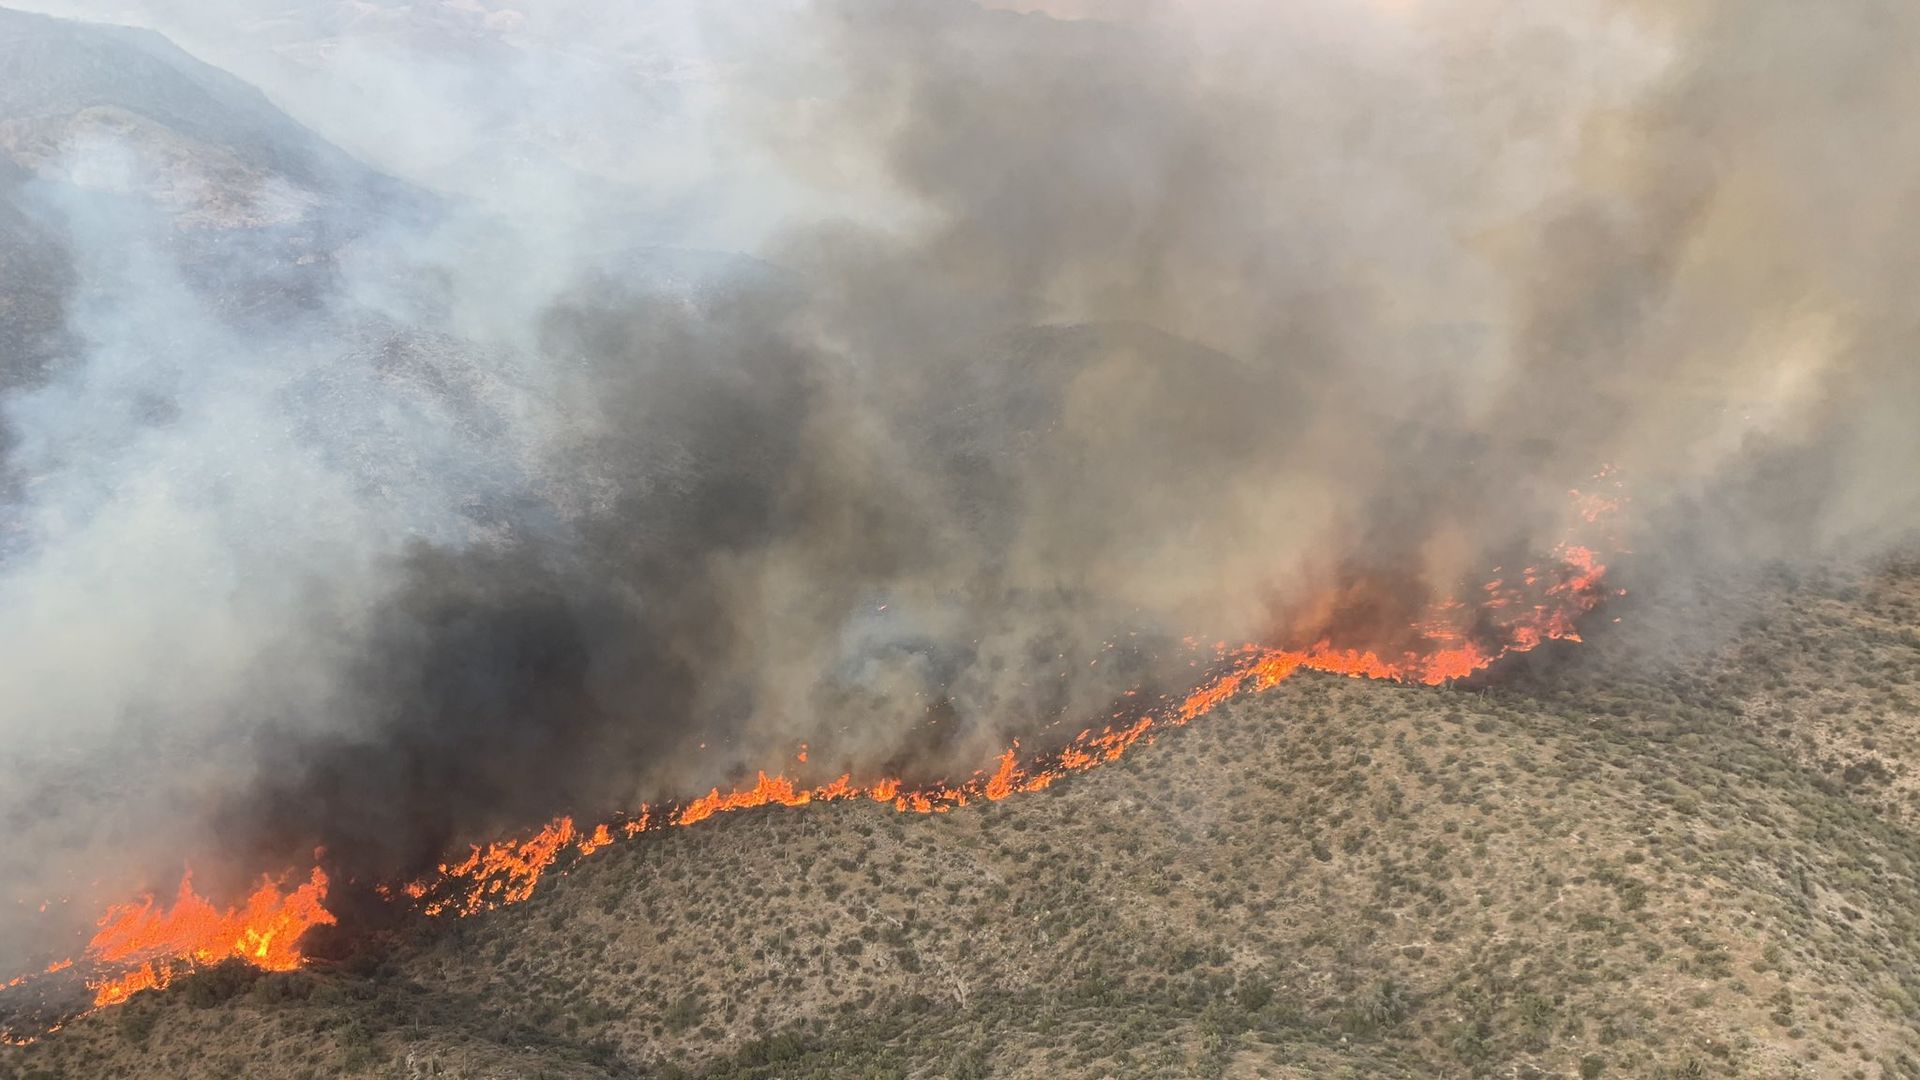 The Telegraph Fire, three miles south of Superior, is approximately 1,500 acres, according to Tonto National Forest.